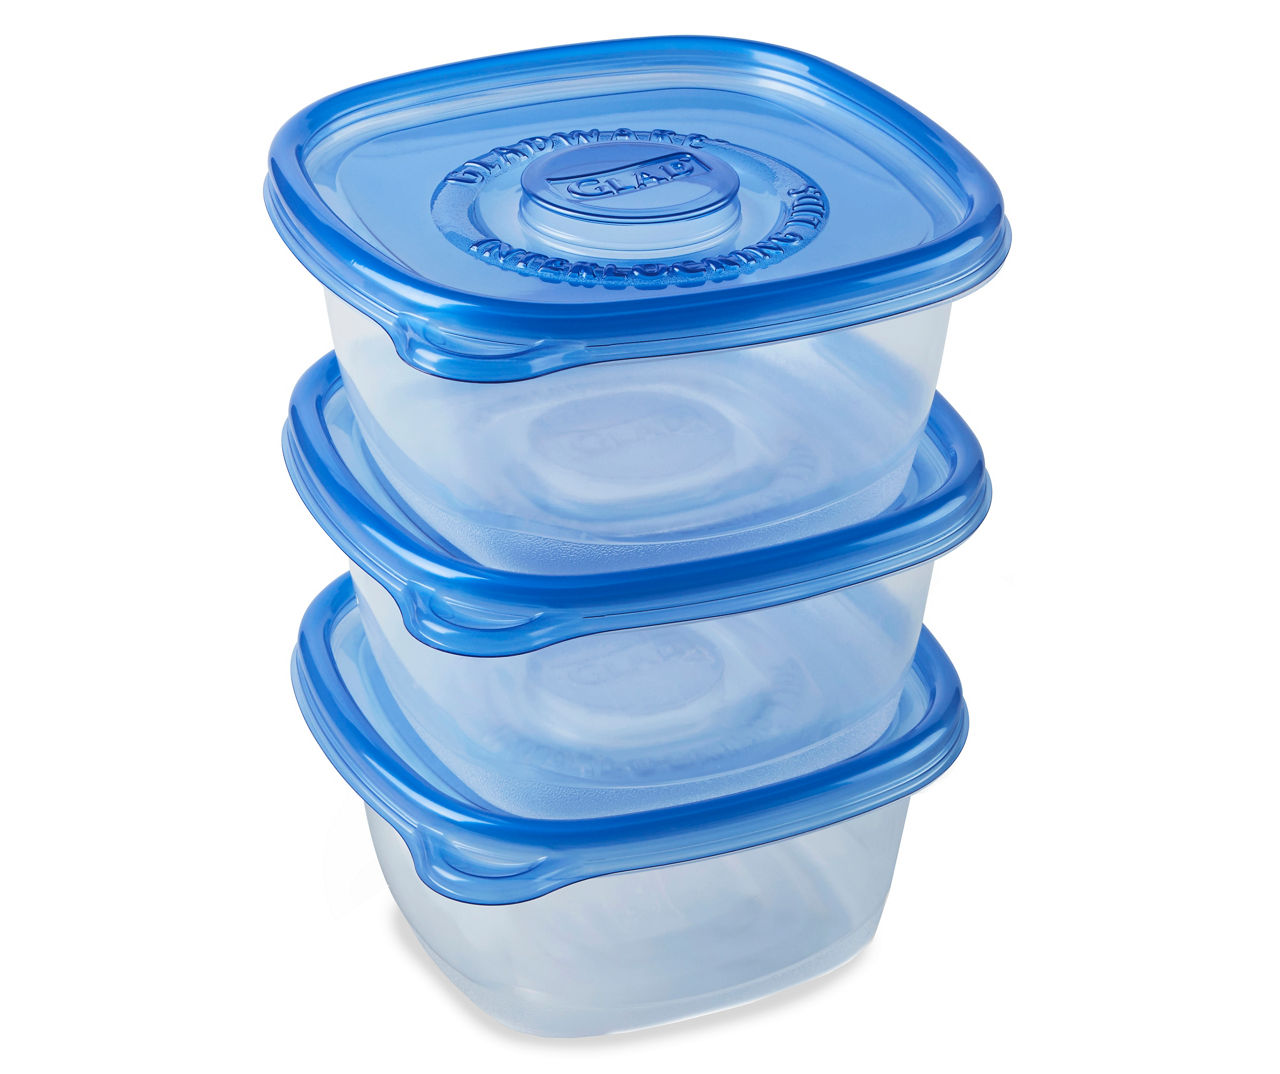 Glad Food Storage Containers, Tall Entree, 42 Ounce, 3 Count